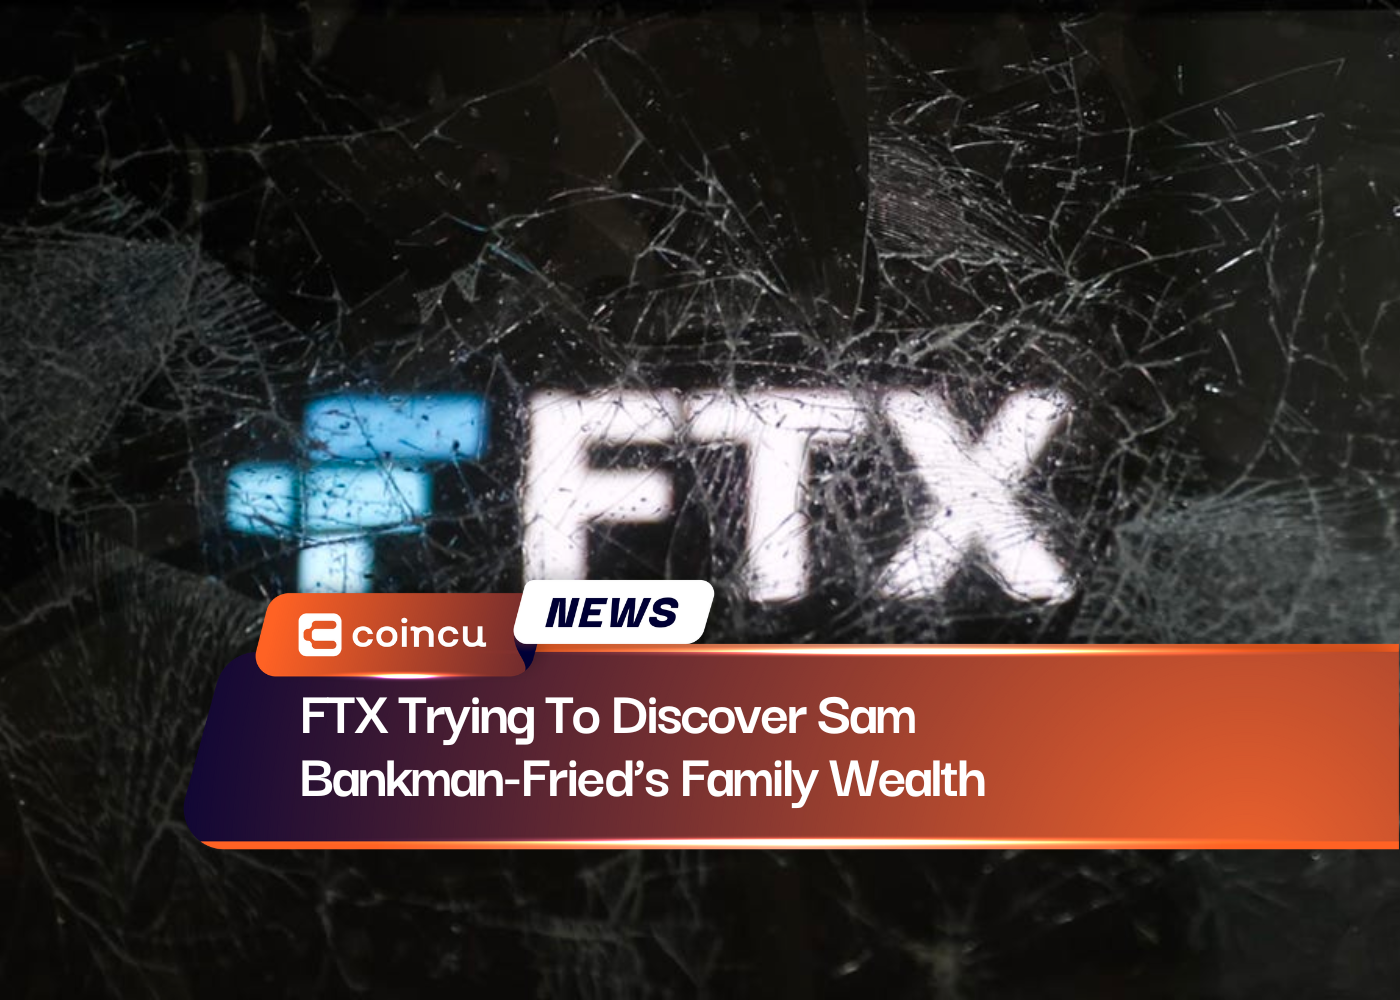 FTX Trying To Discover Sam Bankman-Fried’s Family Wealth